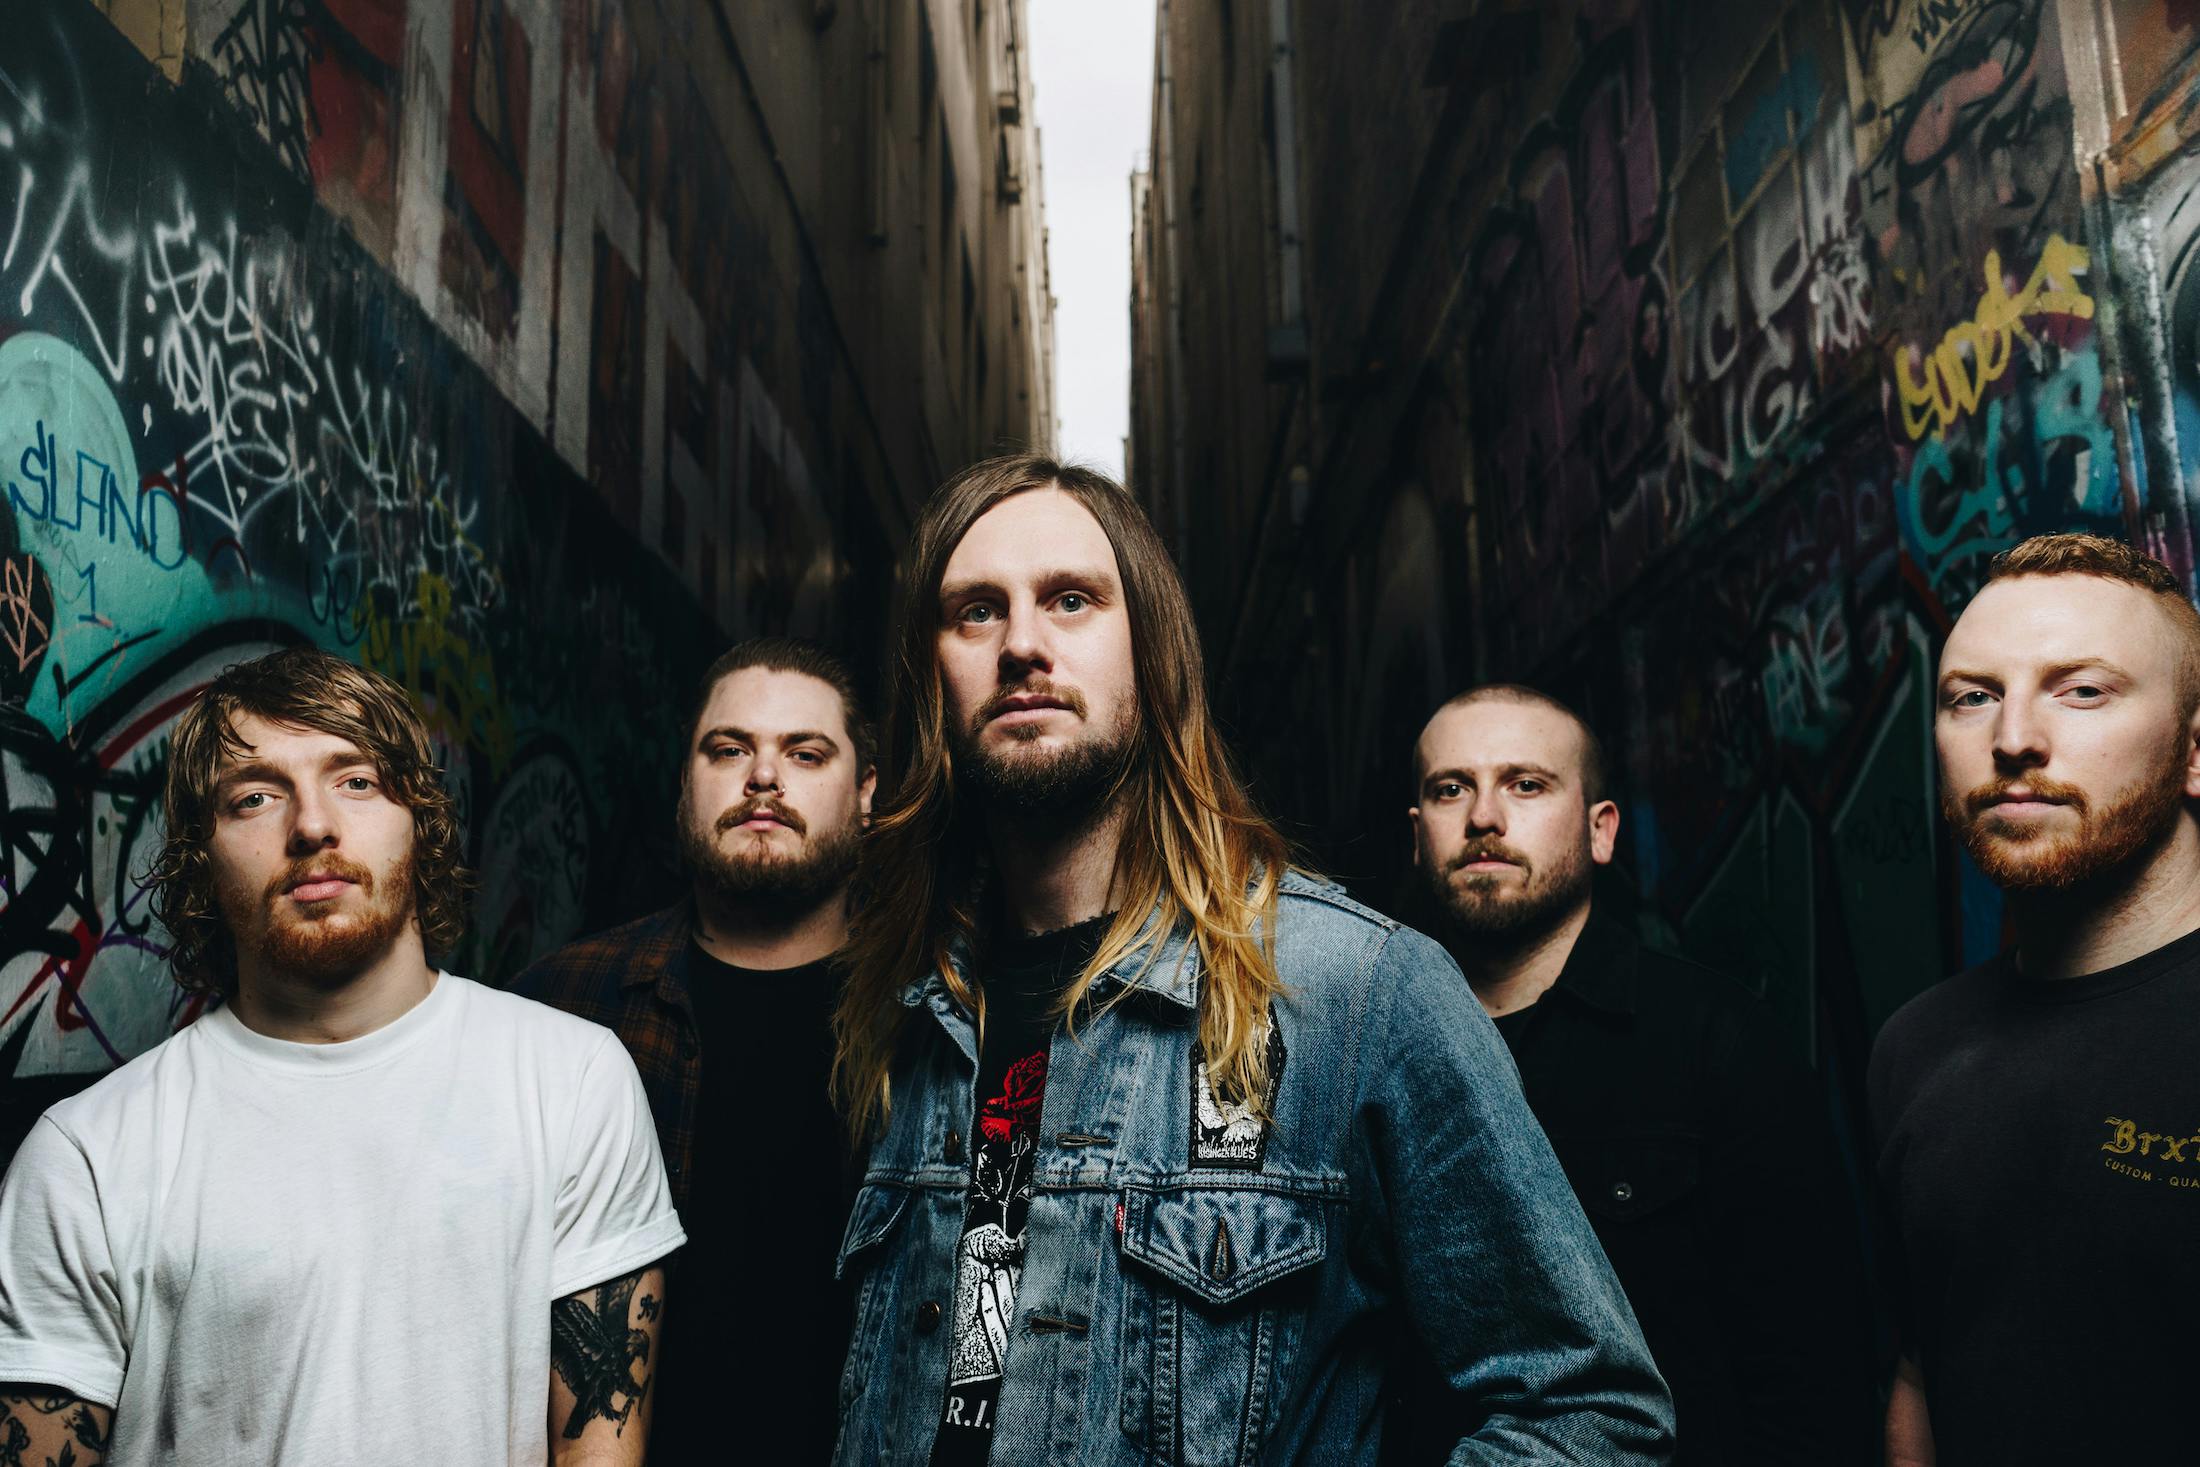 Heads Up! Here's A New While She Sleeps Video